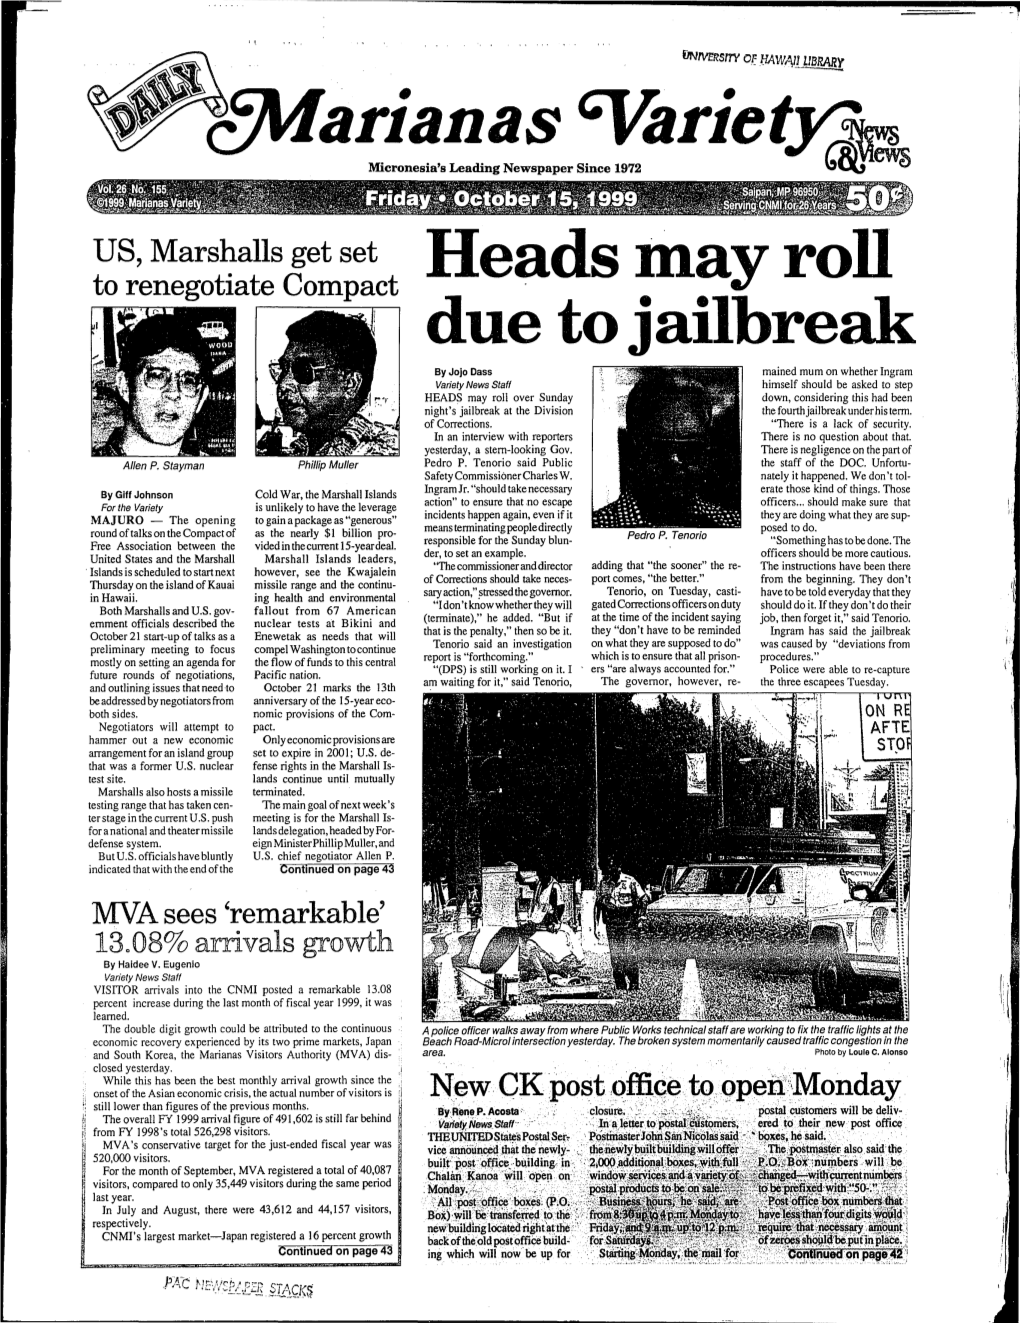 Heads Inay Roll Due to Jailbreak